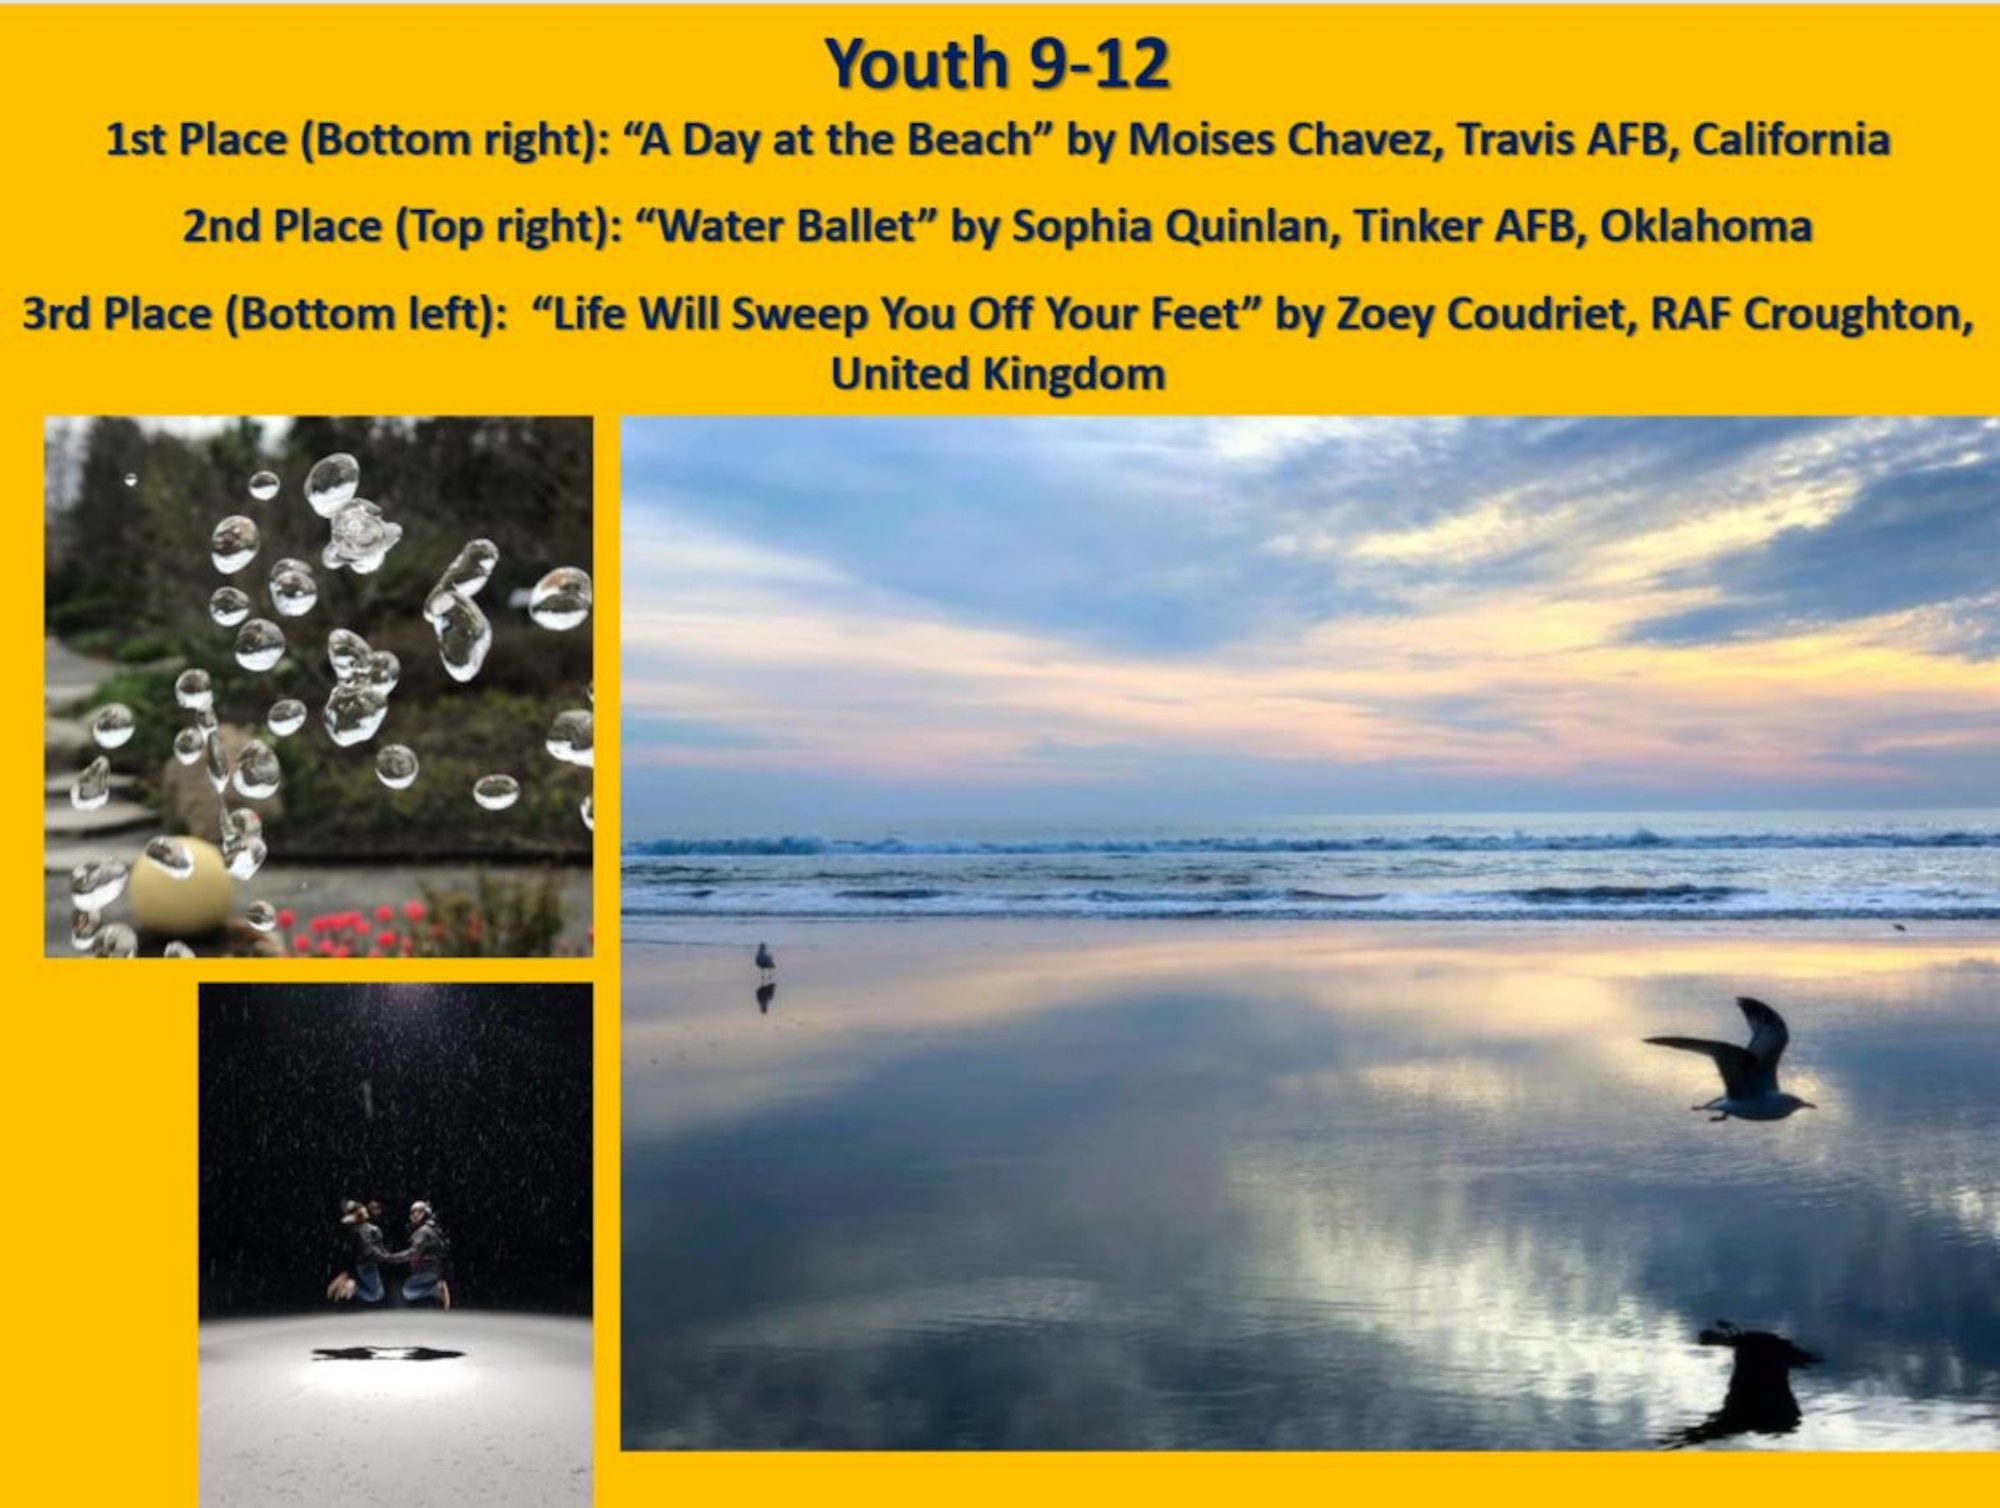 2019 Air Force Photo Contest winners in the Youth 9-13 category